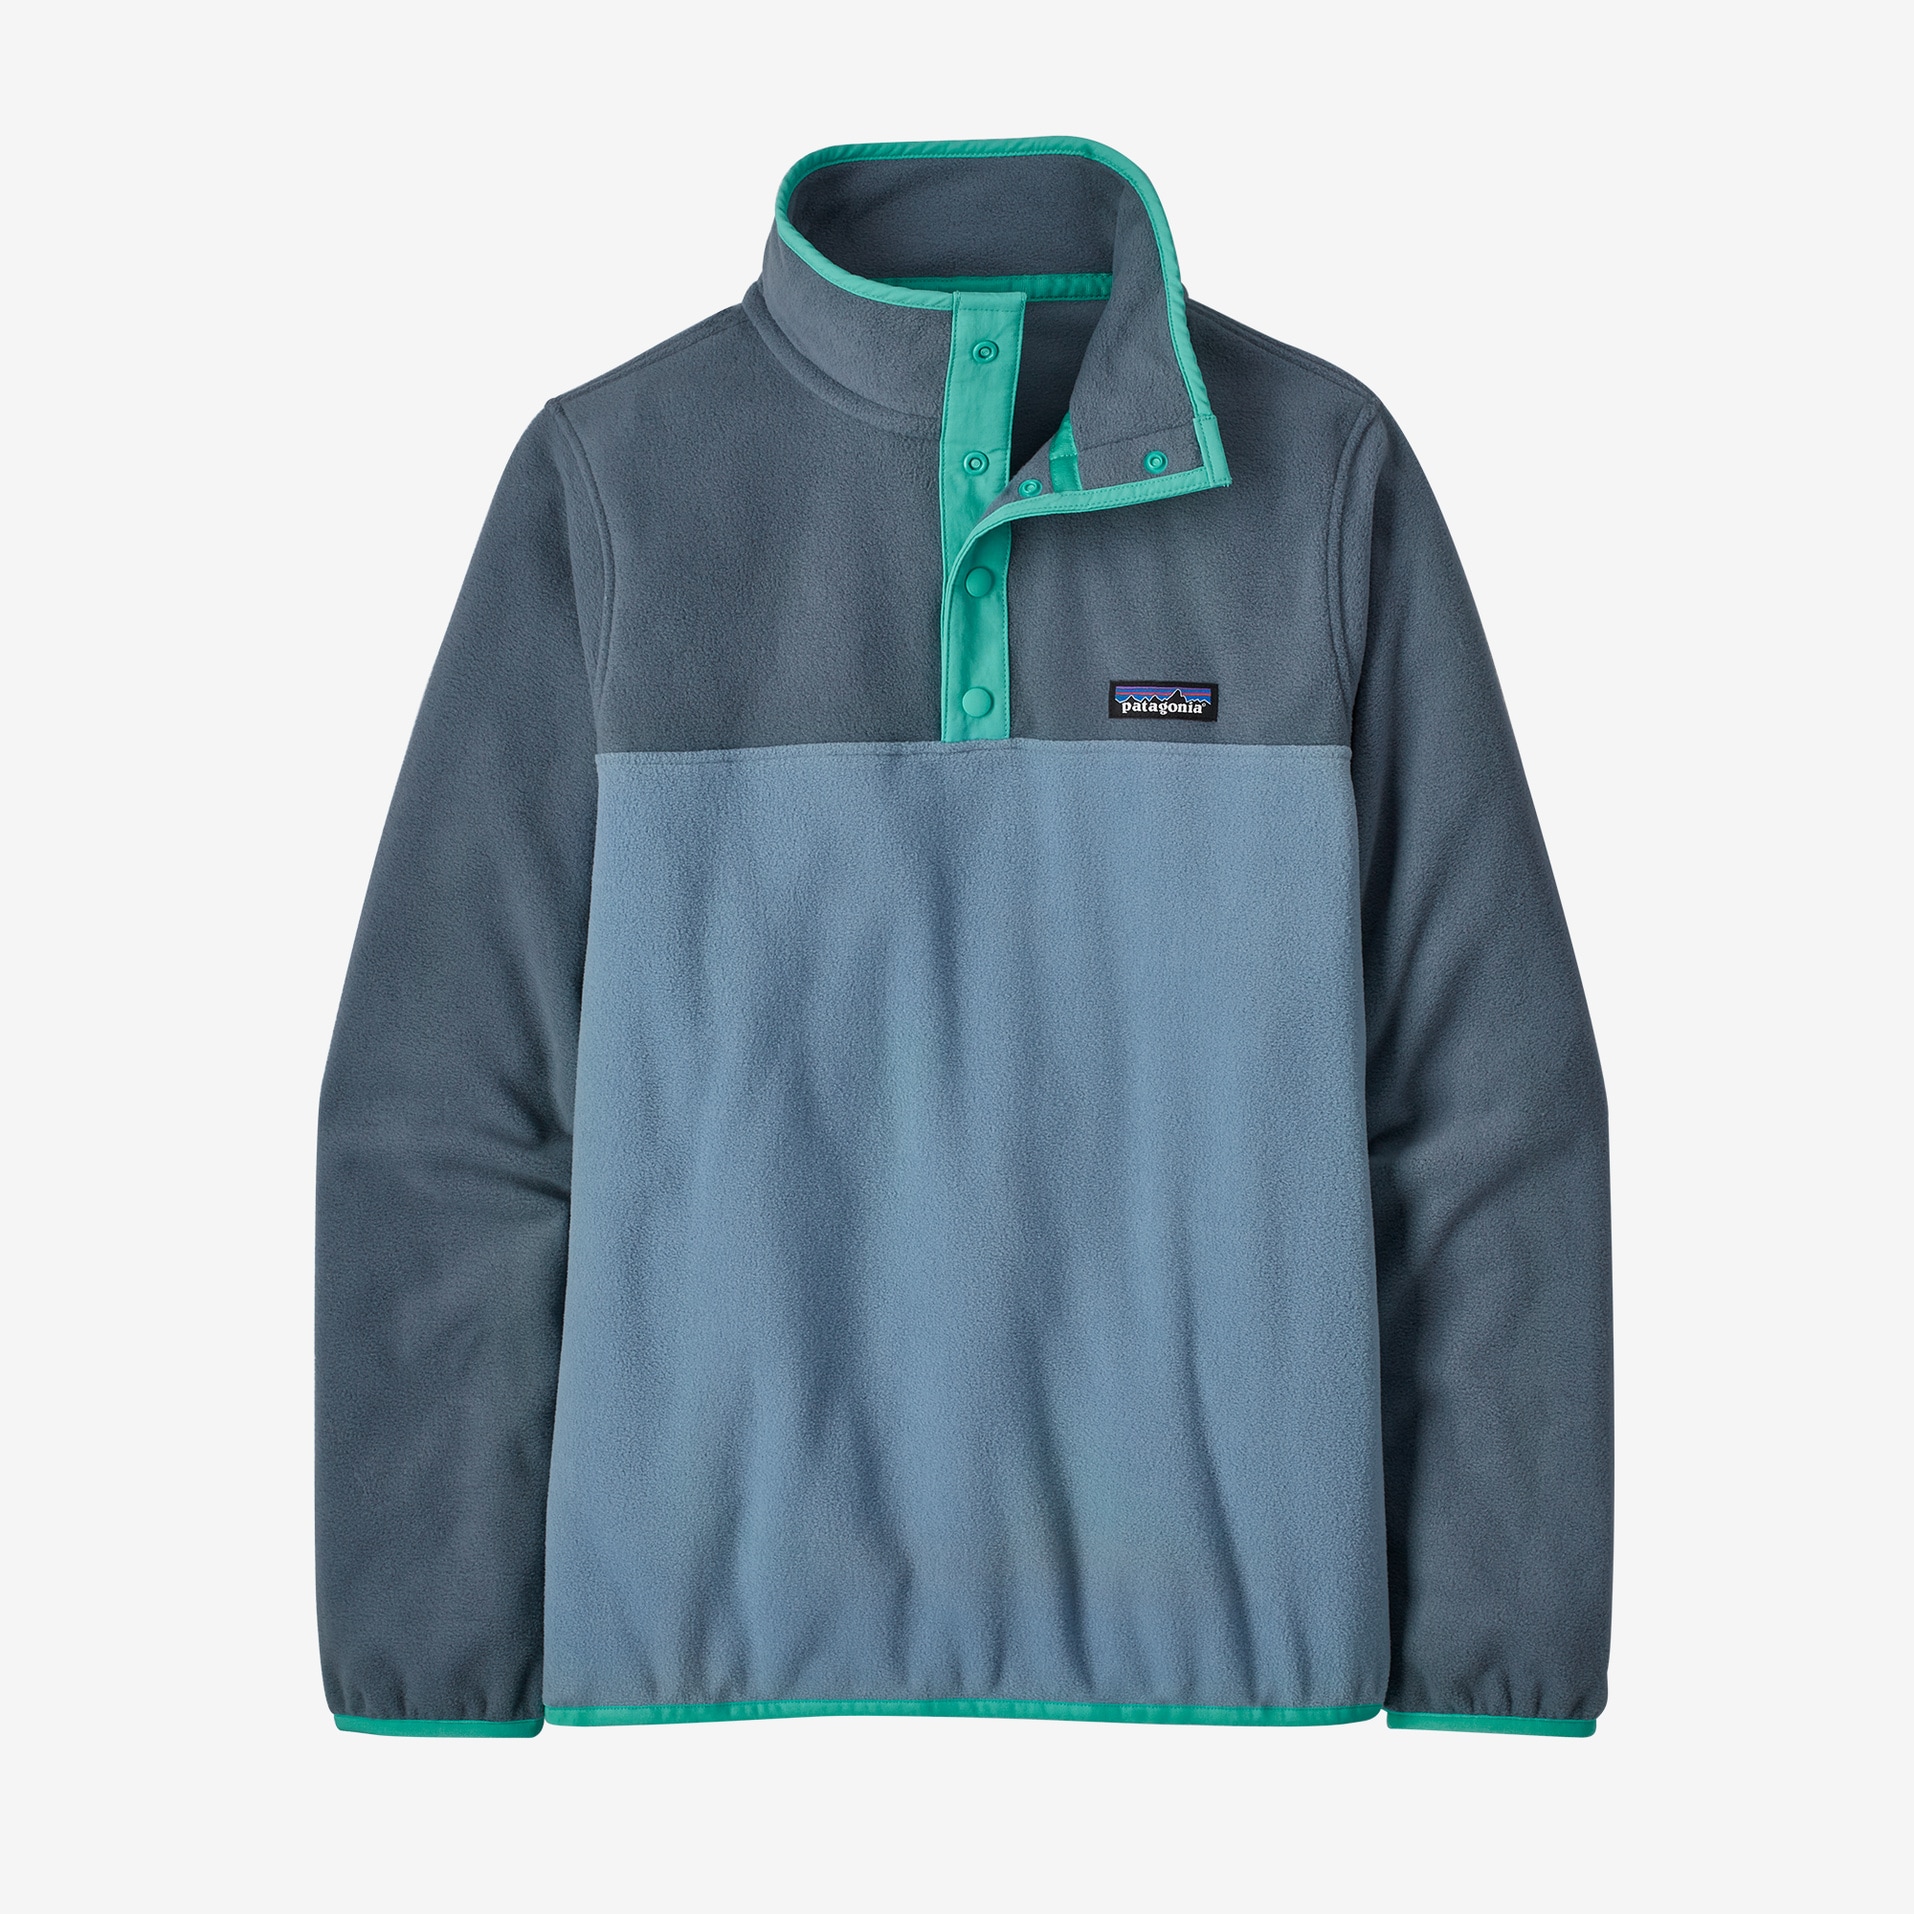 Patagonia W's Micro D Snap-T Pullover